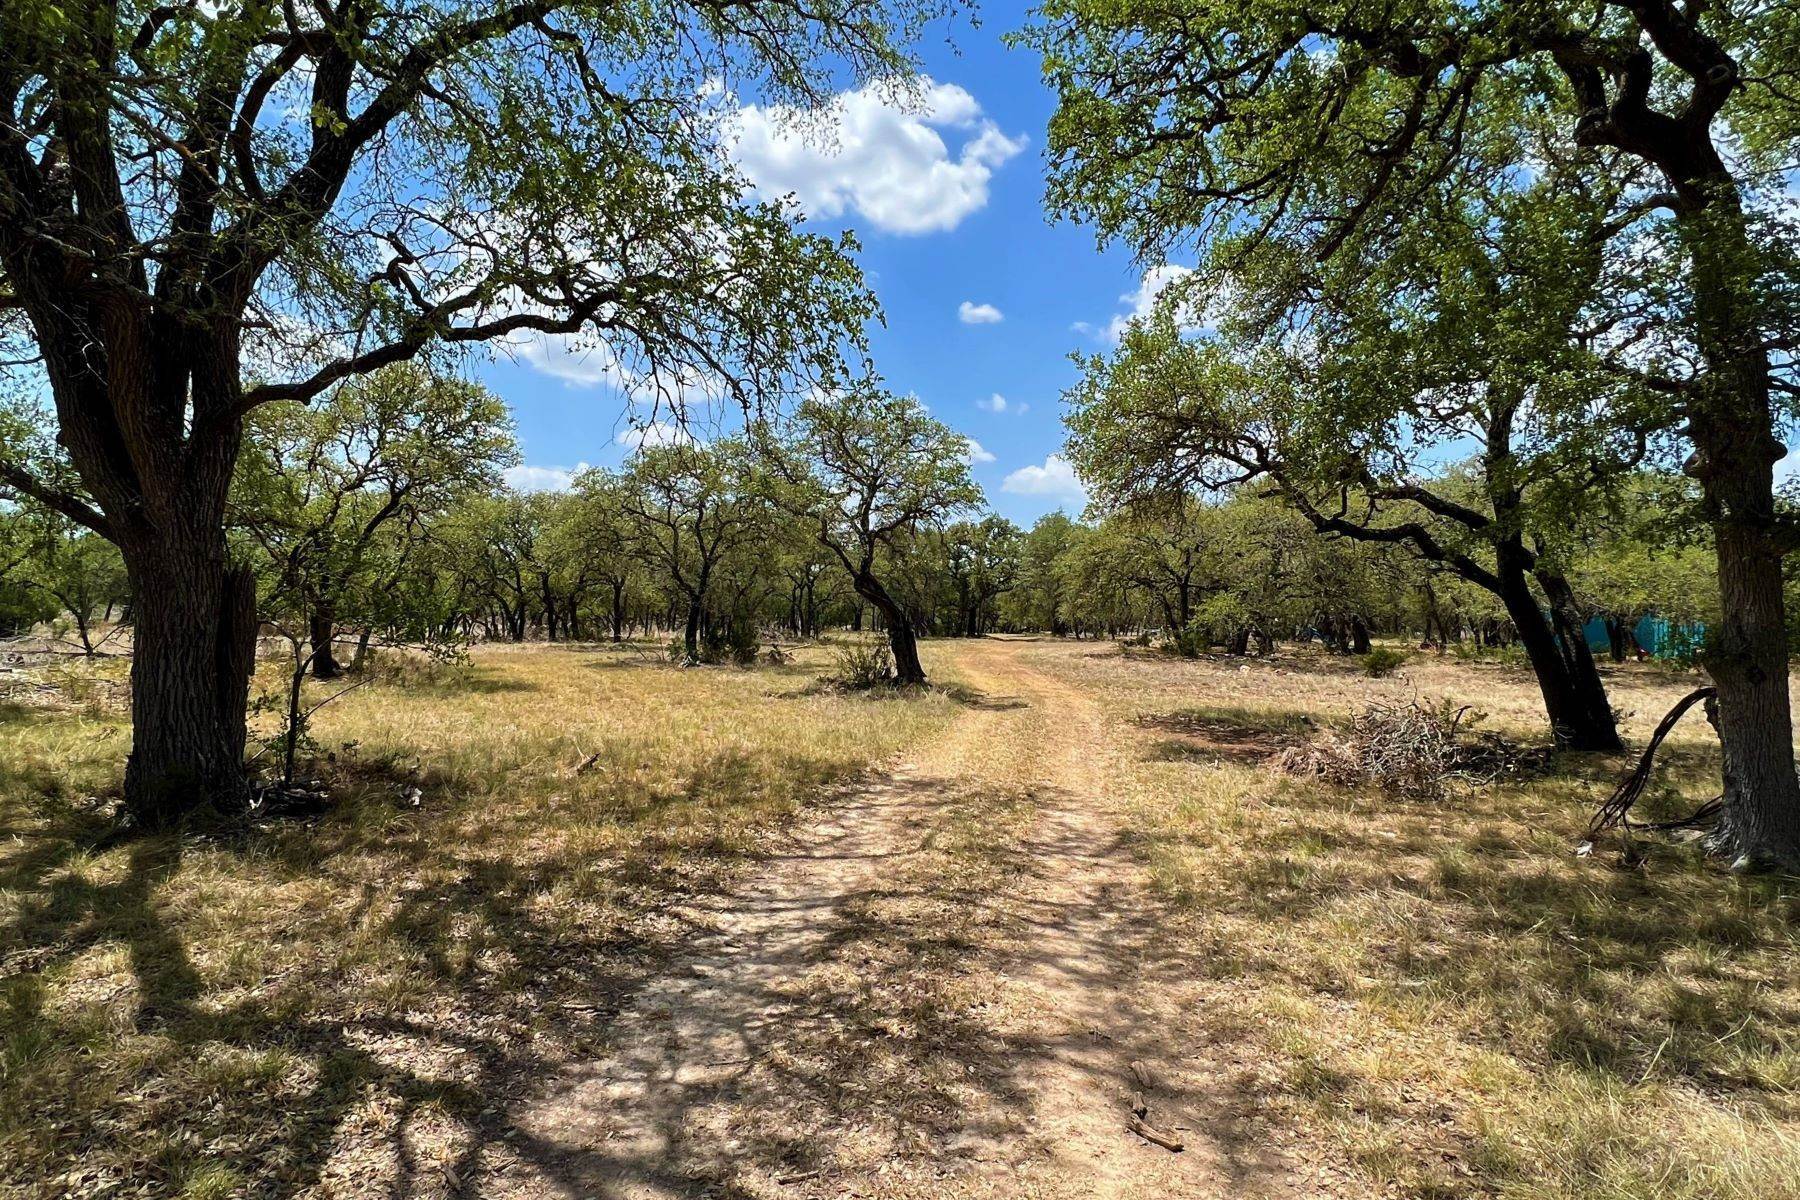 26. Farm and Ranch Properties at 233 Kasten Road, Tract C Boerne, Texas 78006 United States